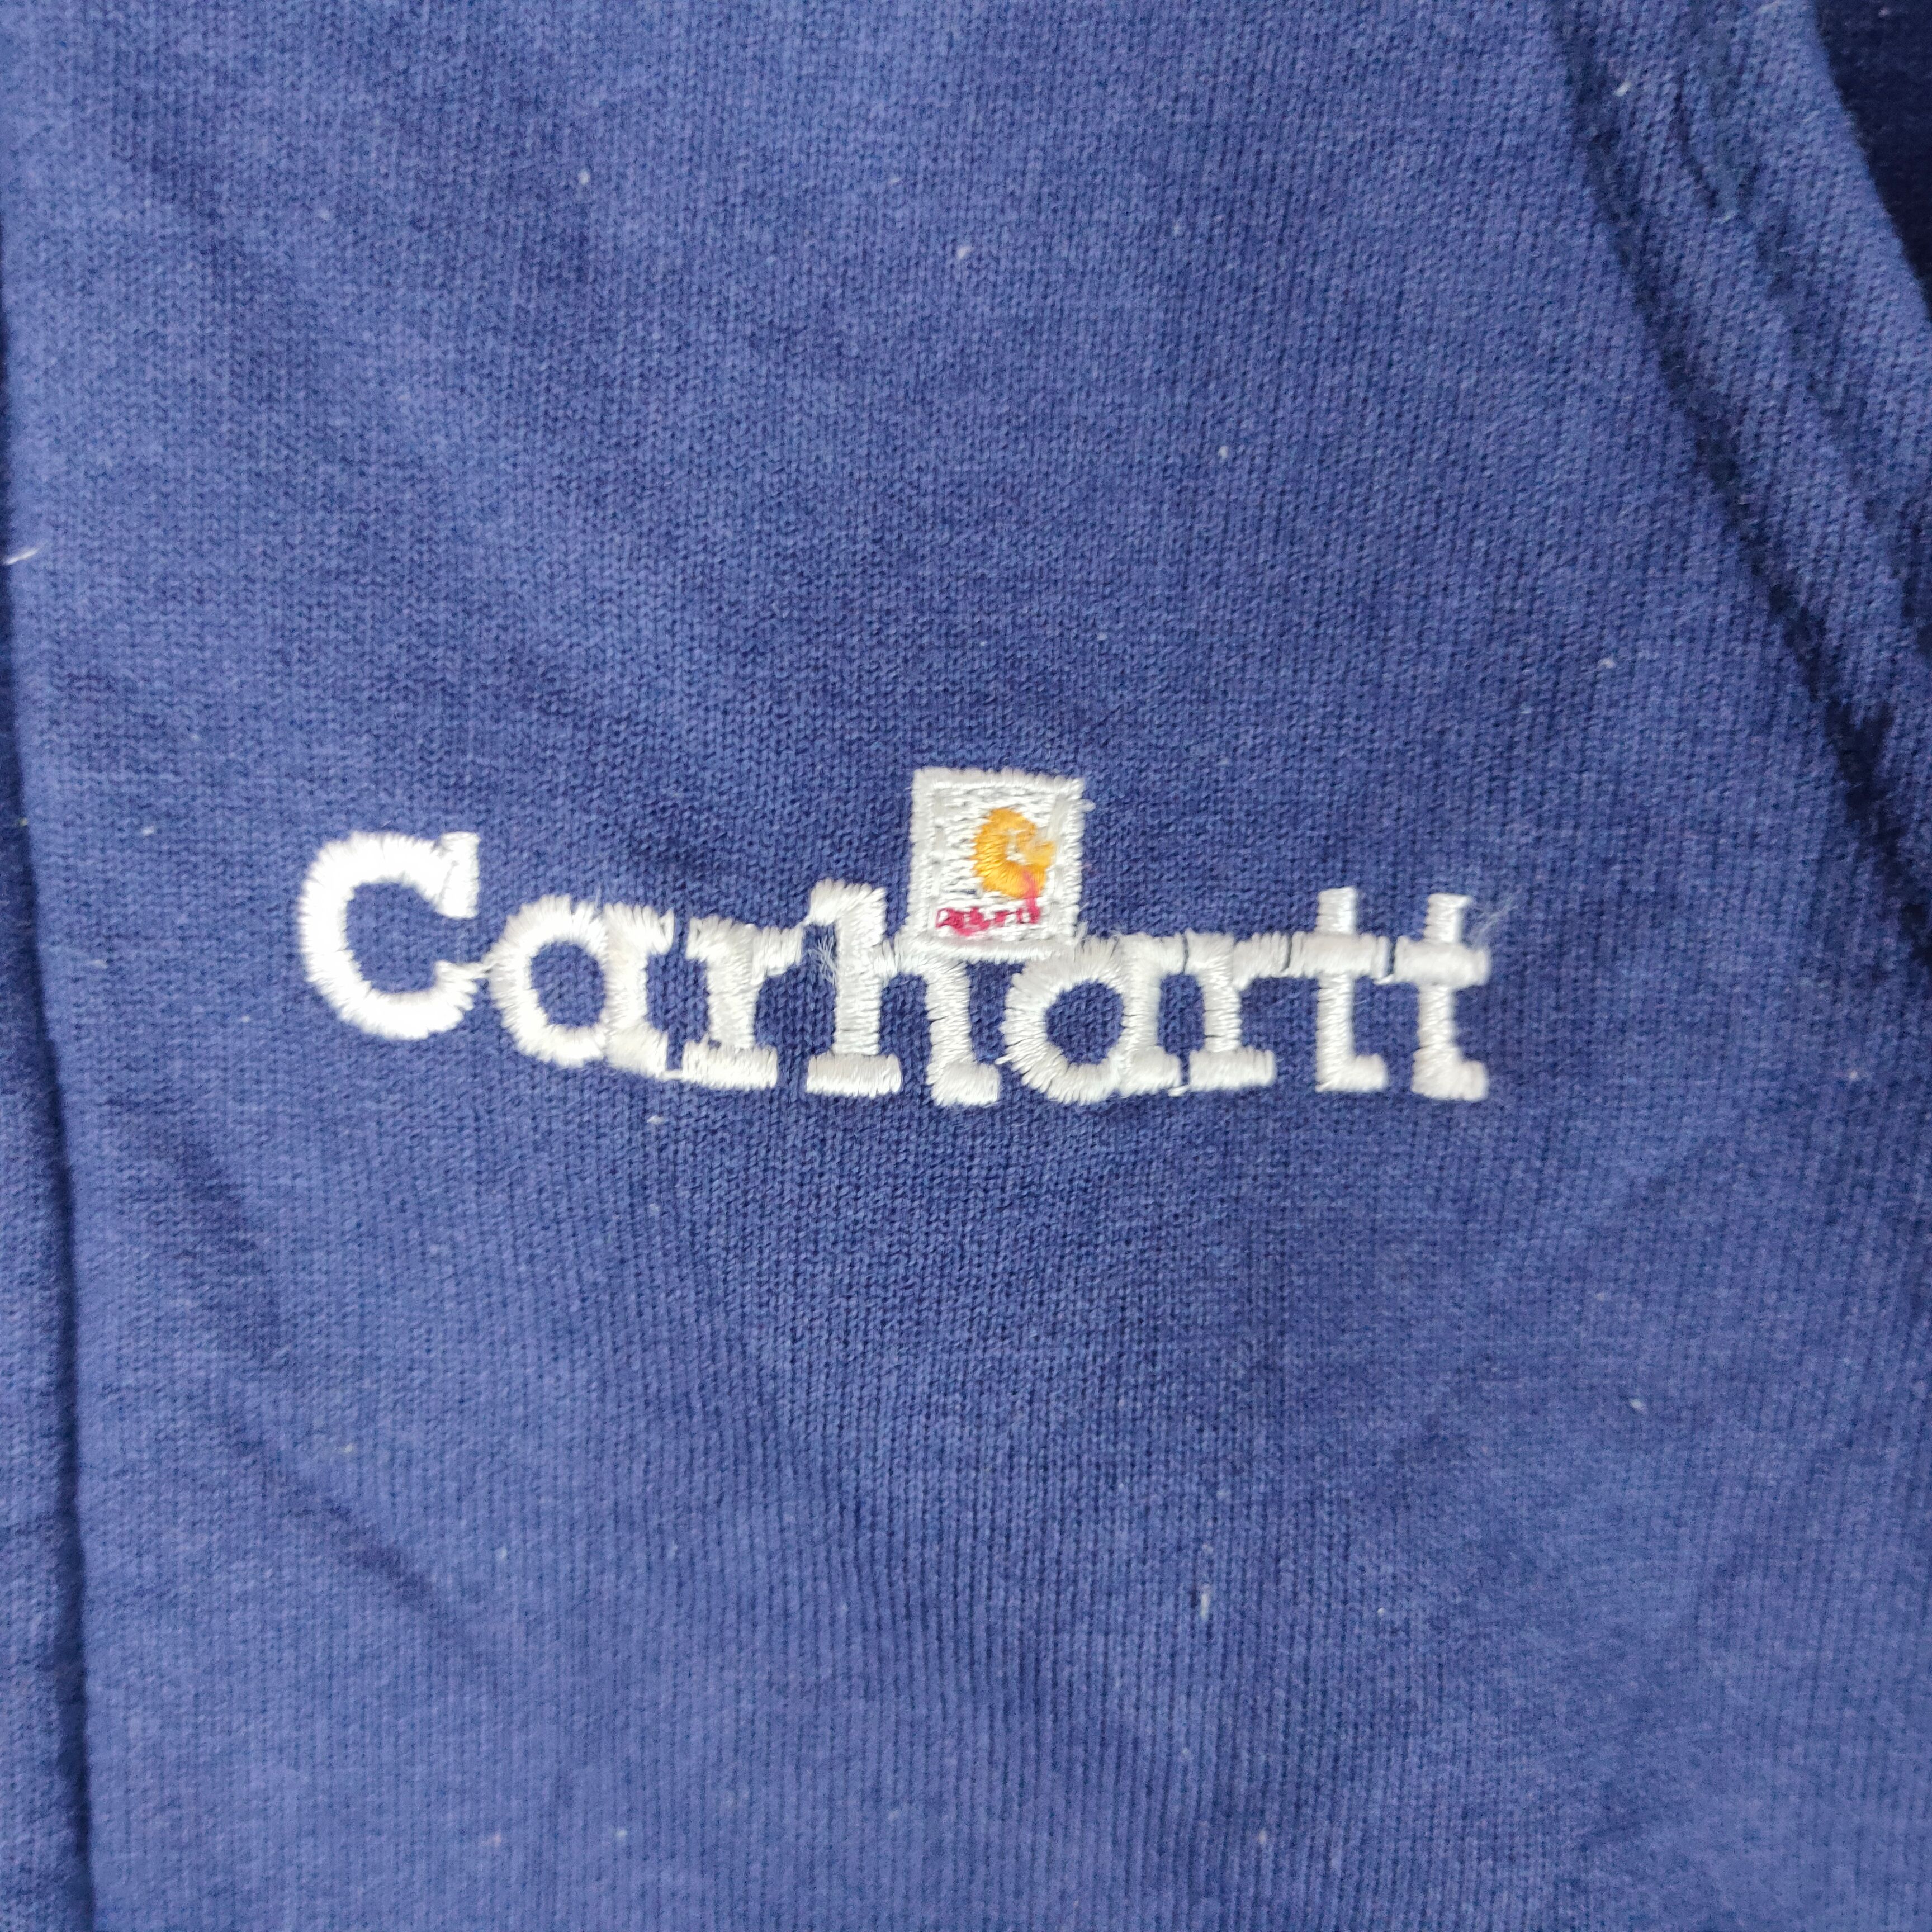 Vintage CARHARTT Embroidery Spellout Heavy L Size Hoodie - 2